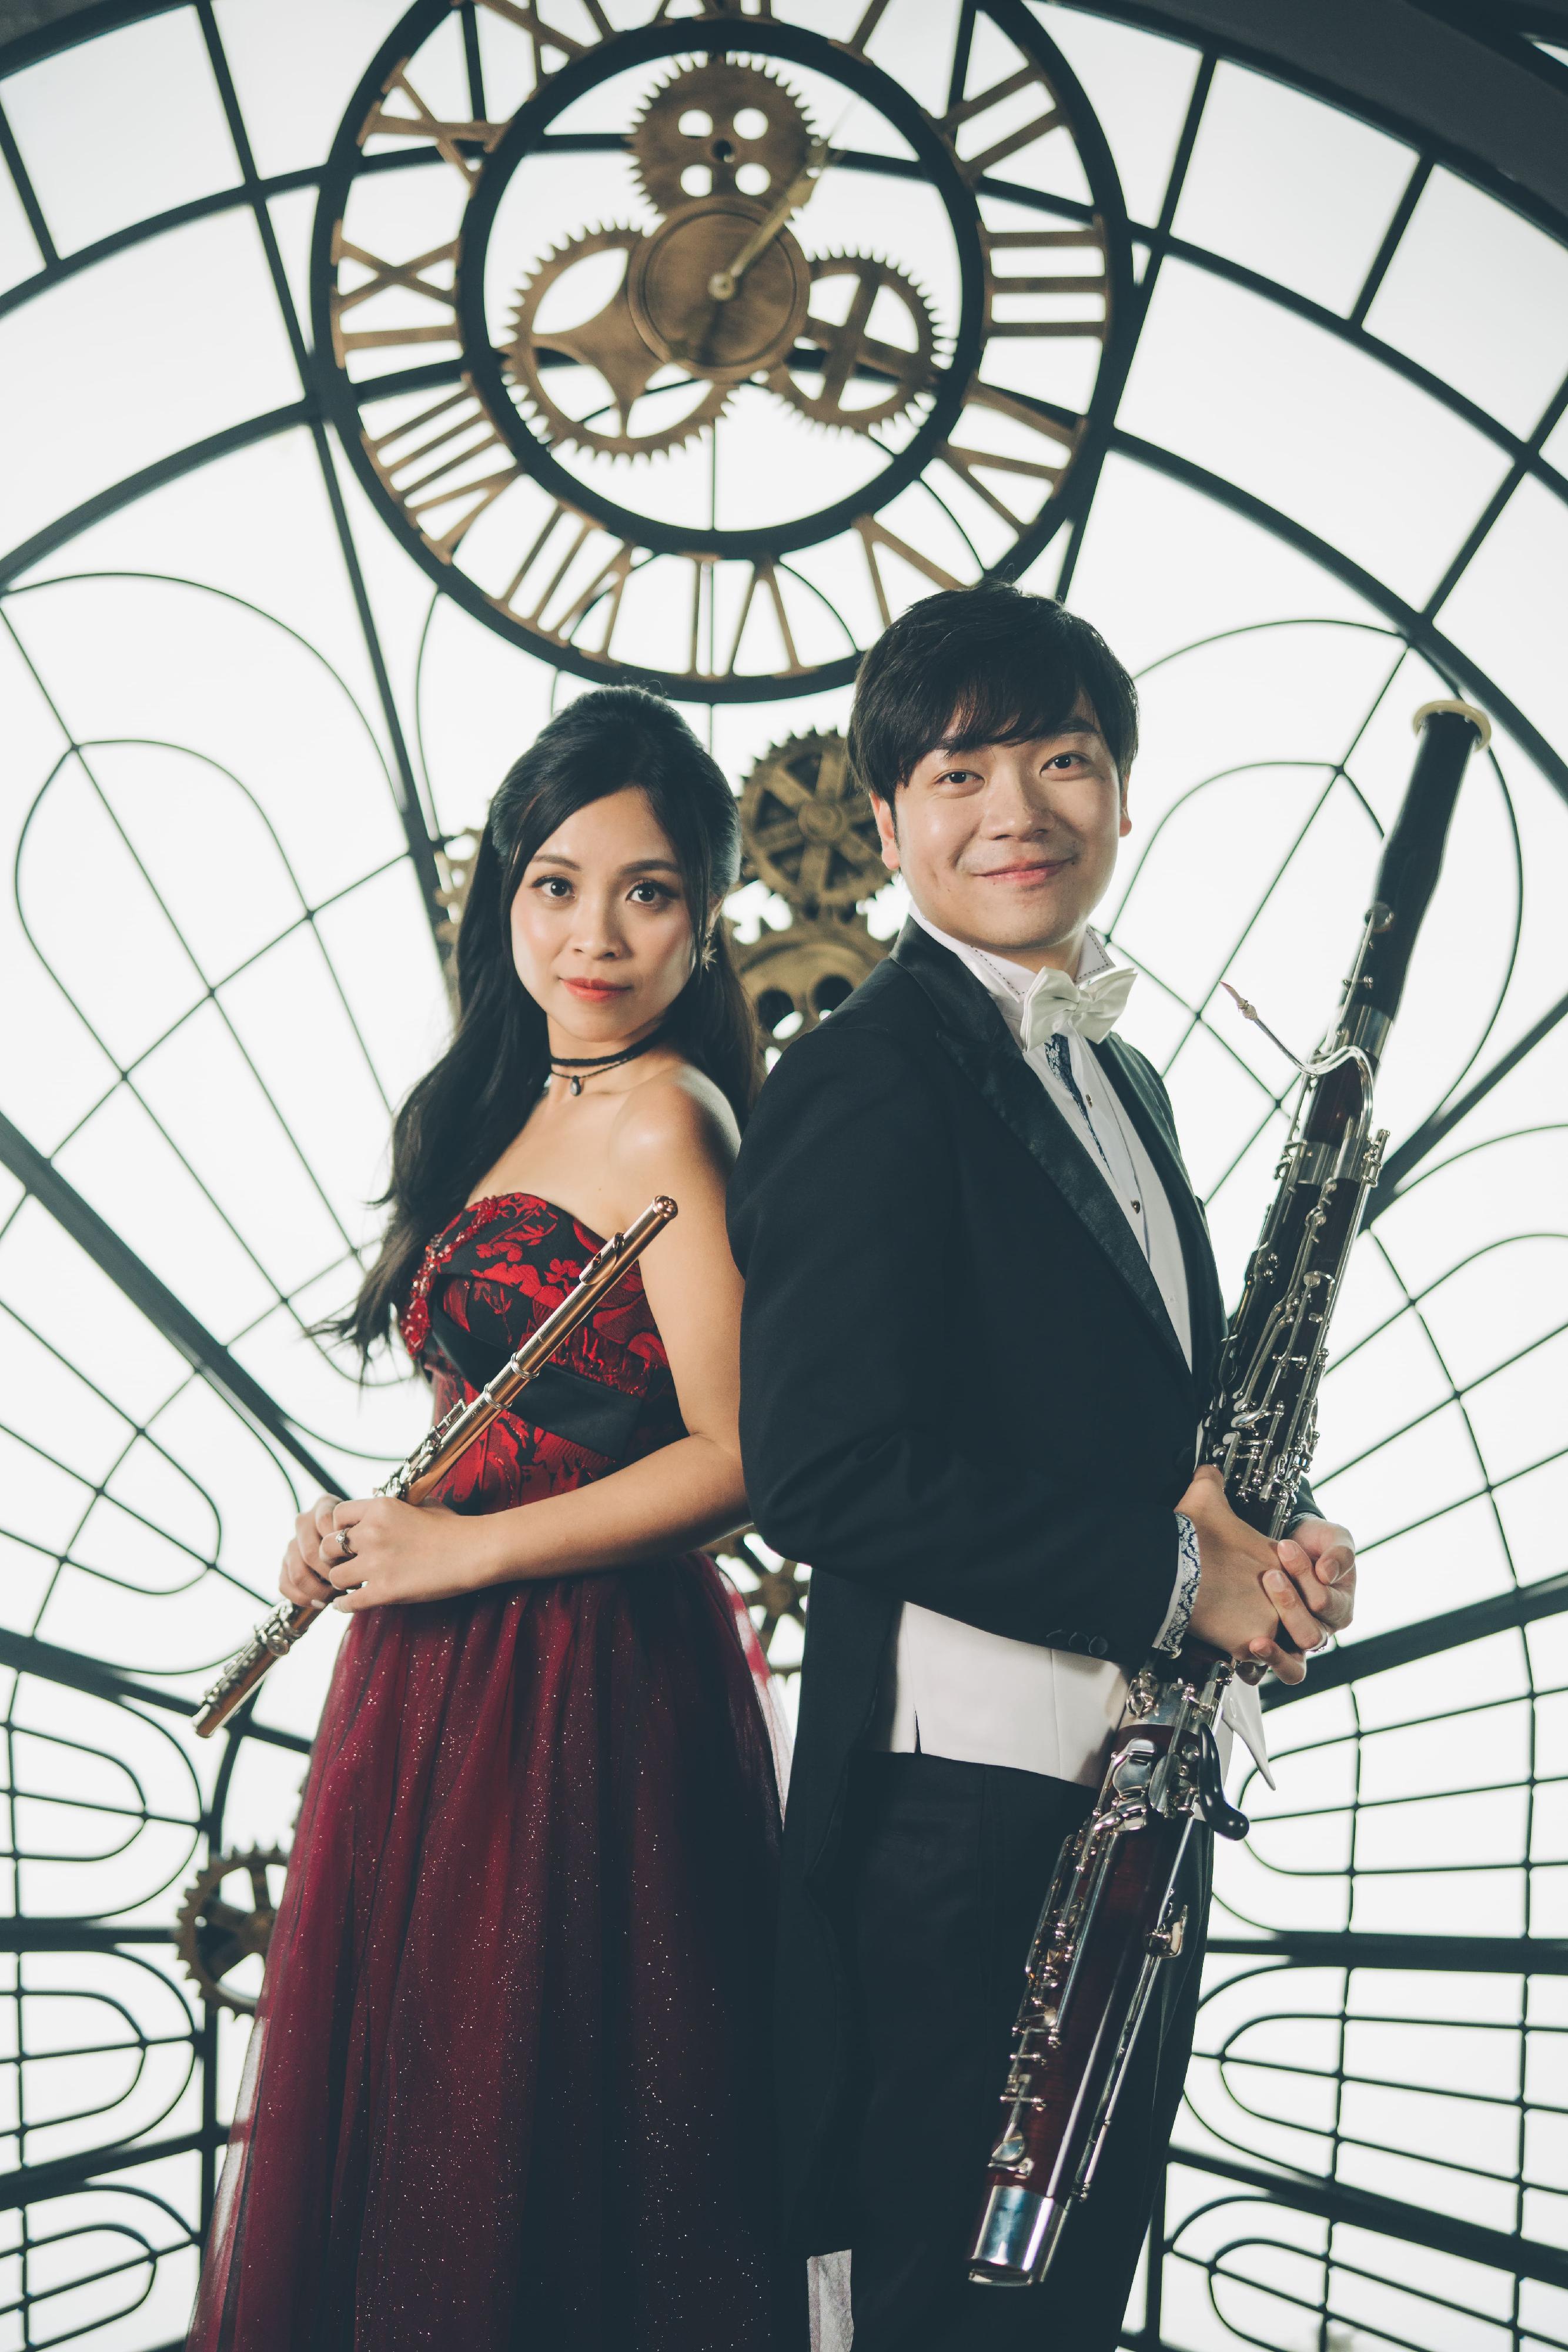 The Leisure and Cultural Services Department's "Hong Kong Artists" Series will present the Duo Recital by Alice Hui (Flute) and Tommy Liu (Bassoon) in May. Photo shows flautist Hui (left) and bassoonist Liu (right).